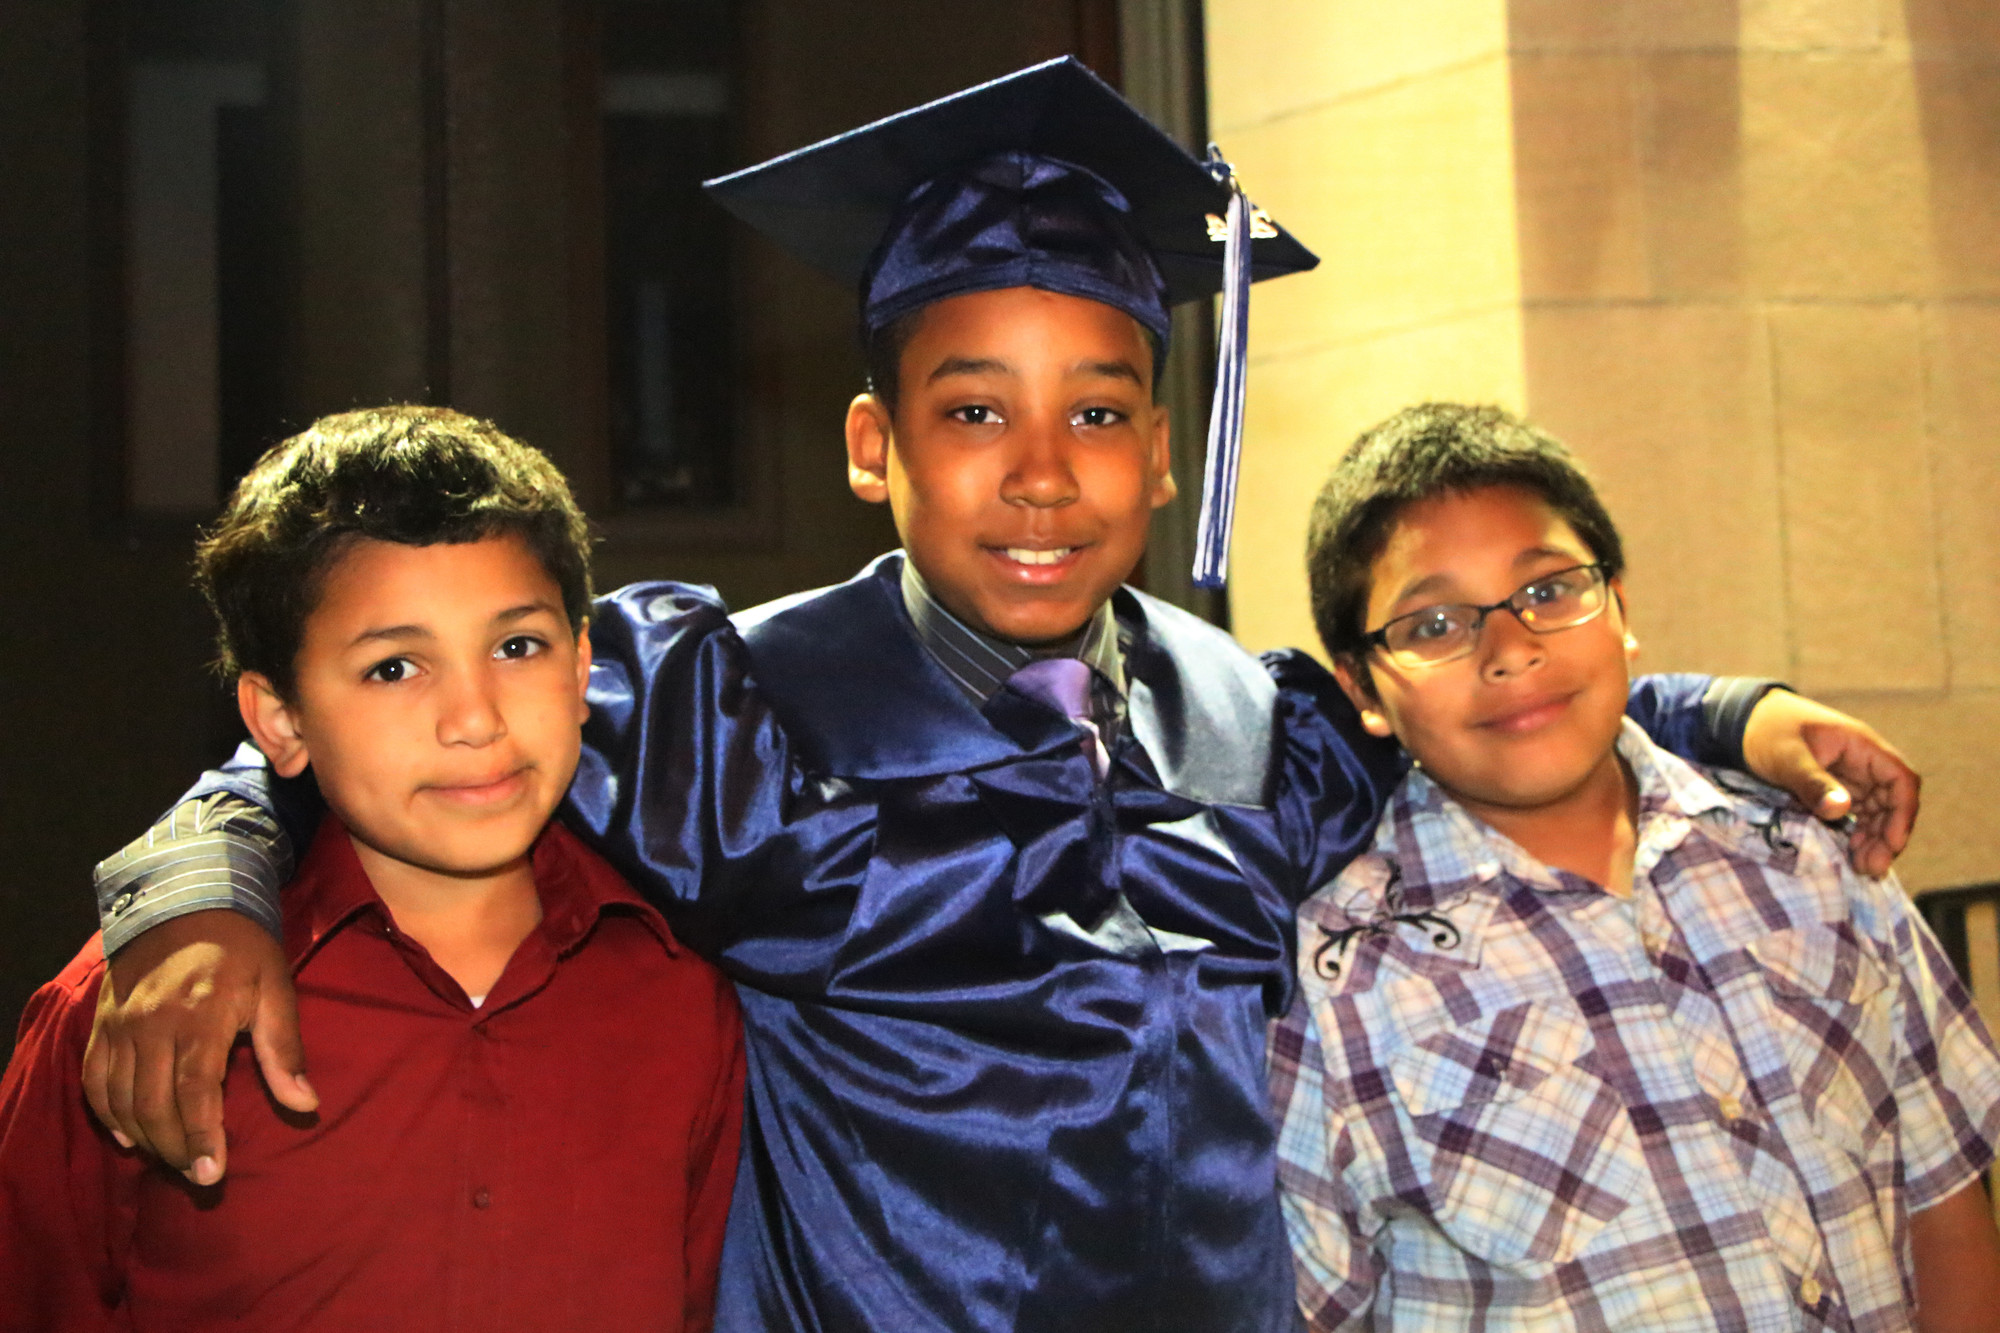 Graduate Michael Valenzuela  ,13, with his cousins, Adrian Rivera,10, and Jonathan Rivera, 9yrs, following the ceremony on June 12.